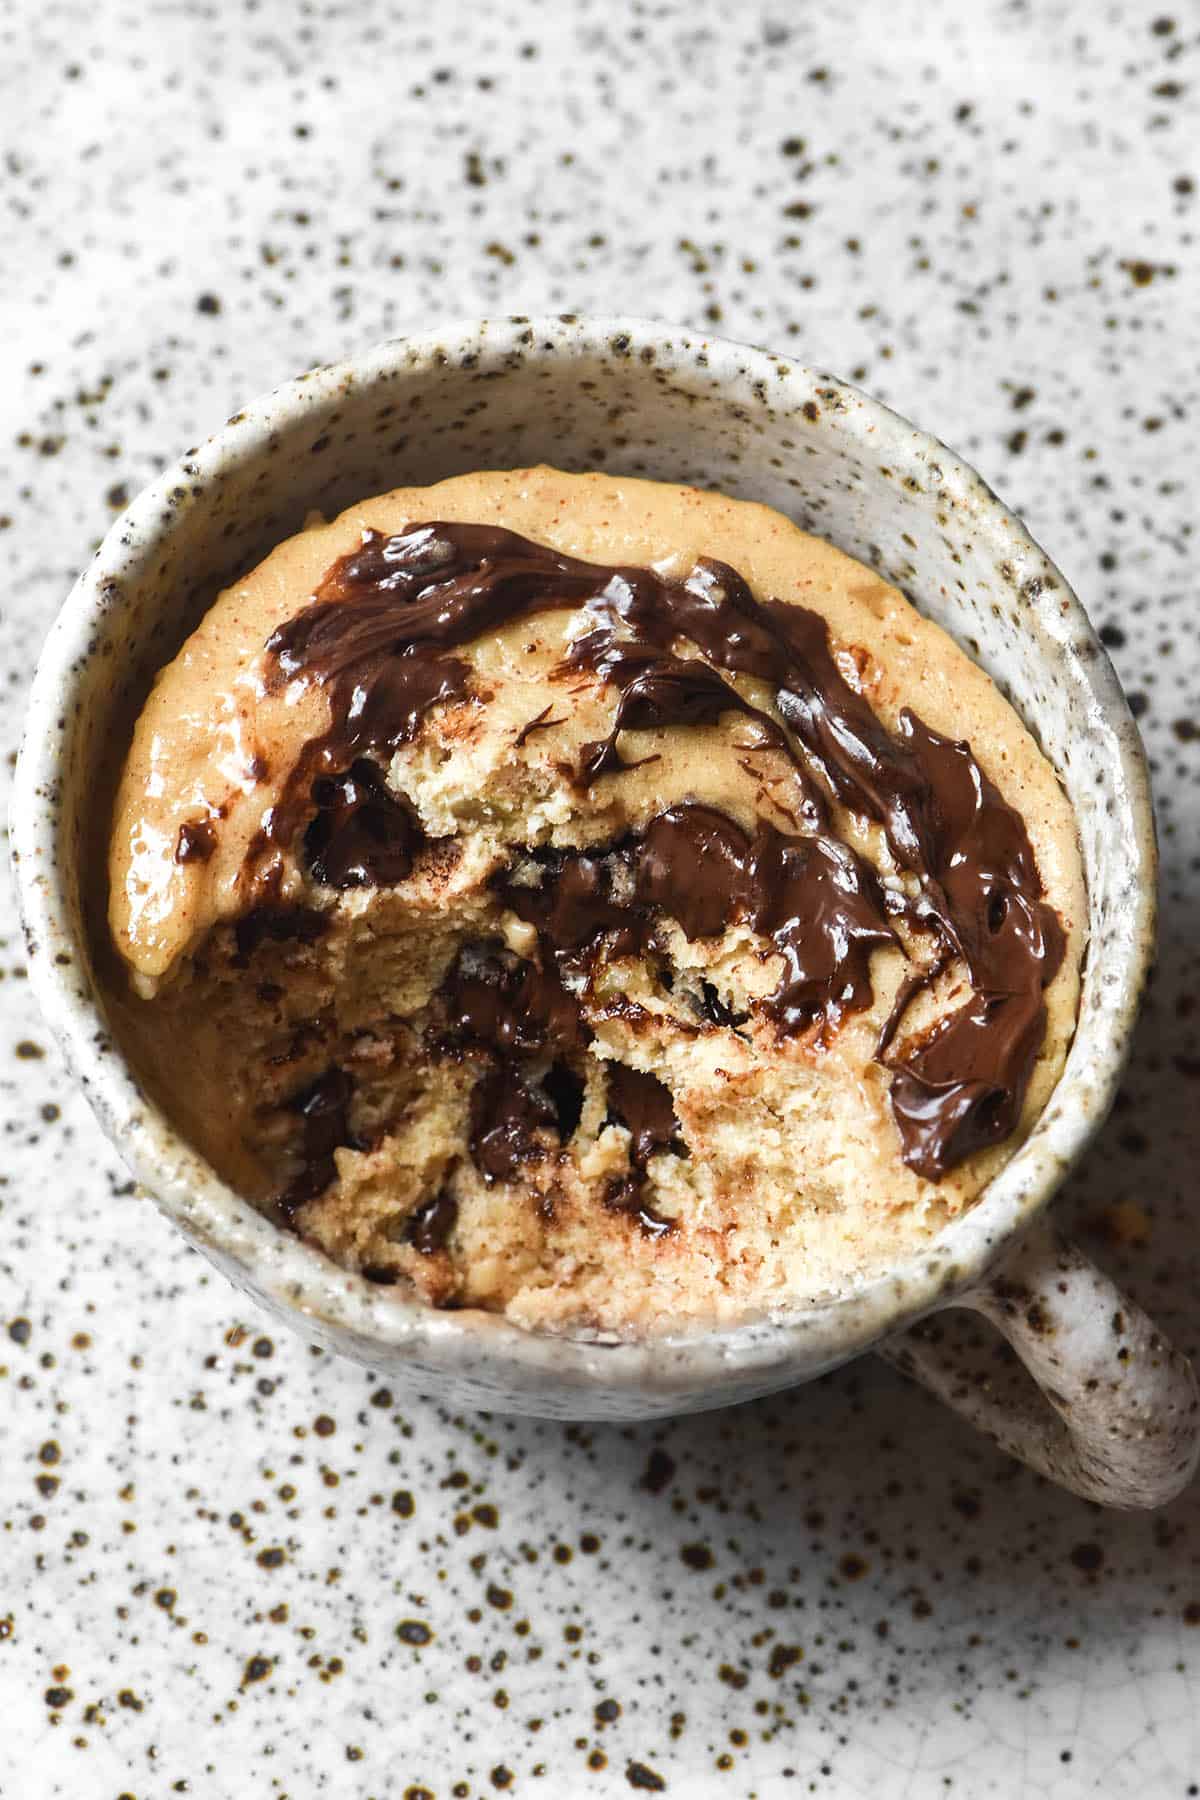 An aerial view of a whey protein mug cake swirled with chocolate chips. A big spoonful has been removed, revealing the mug cake crumb and melted chocolate chips in the centre. The mug sits on a white speckled ceramic plate that acts as the backdrop for the image. 